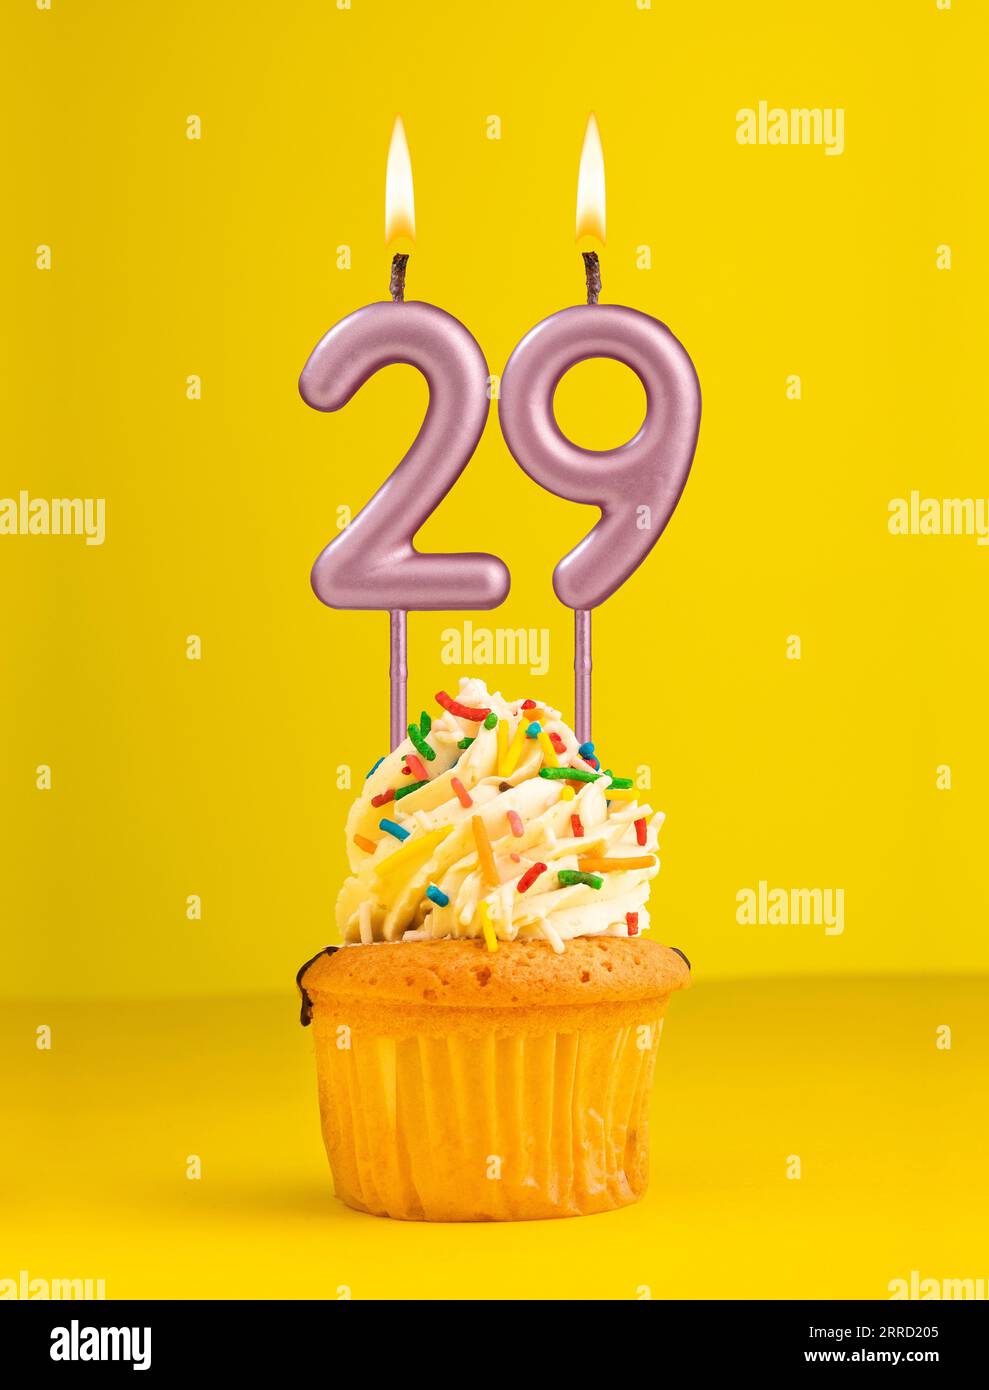 Birthday candle number 29 - Invitation card with yellow background Stock Photo